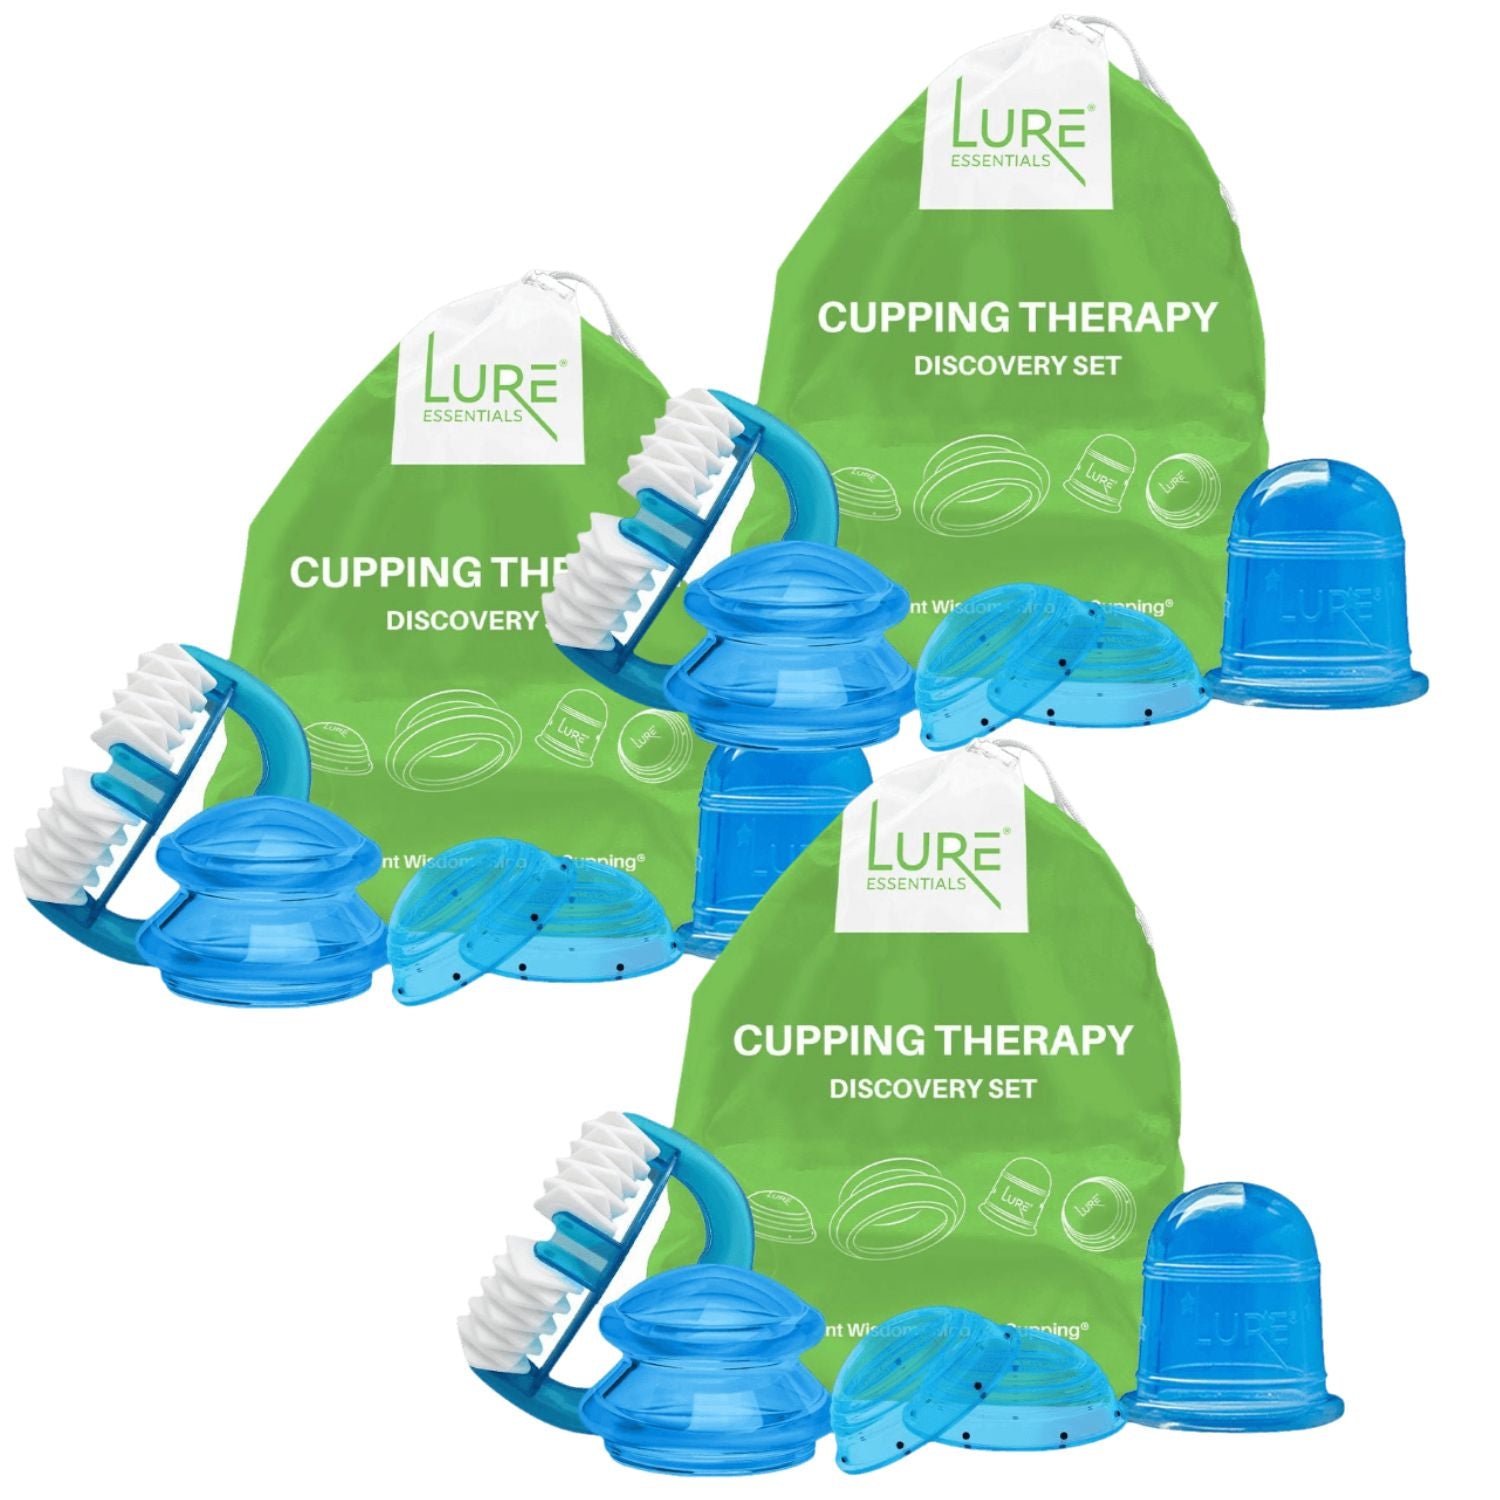 DISCOVERY Beginner Cupping Lymphatic Set - Lure Essentials